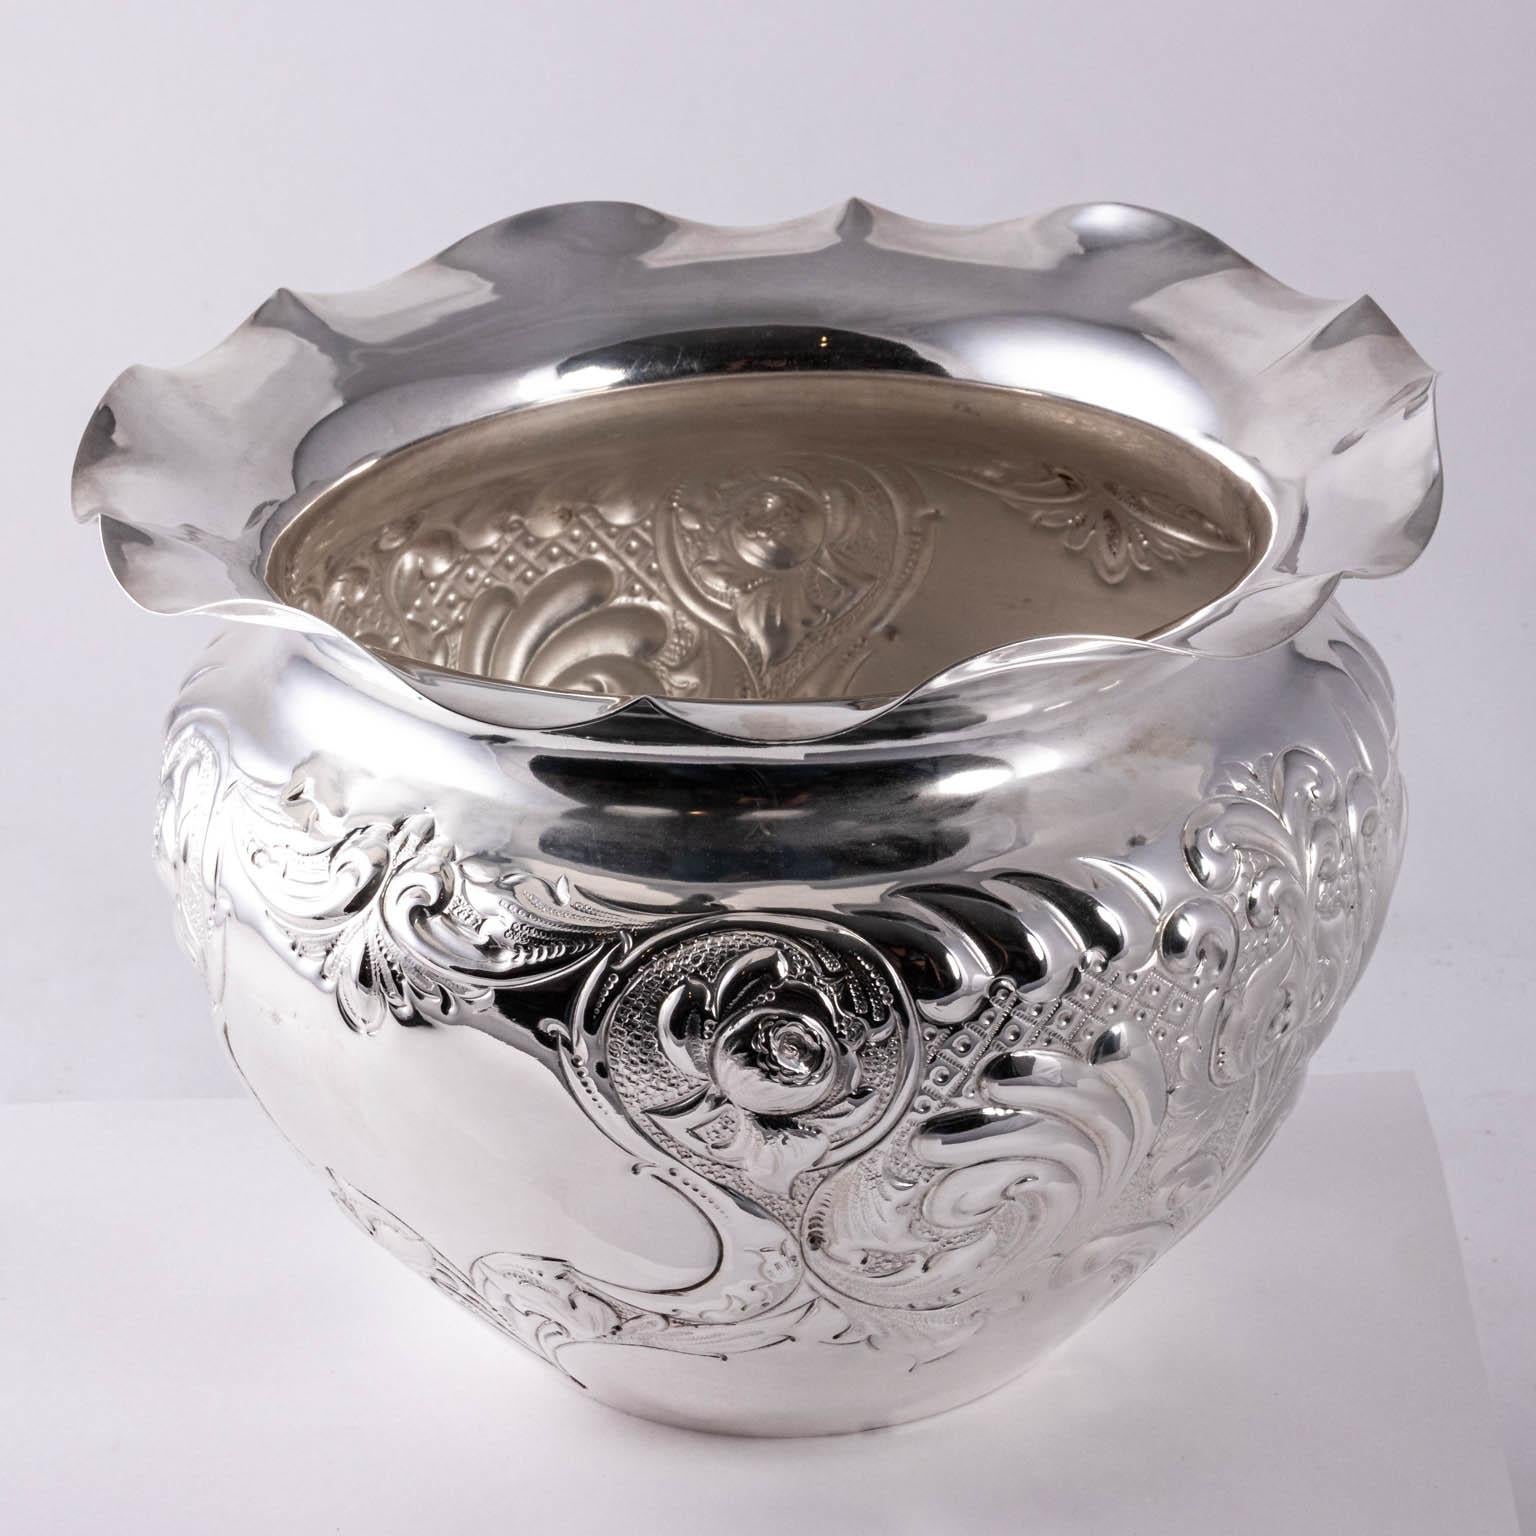 Extra large Edwardian silver plate cachepot with scalloped edge, circa 1900. Made in England. Please note of wear consistent with age.